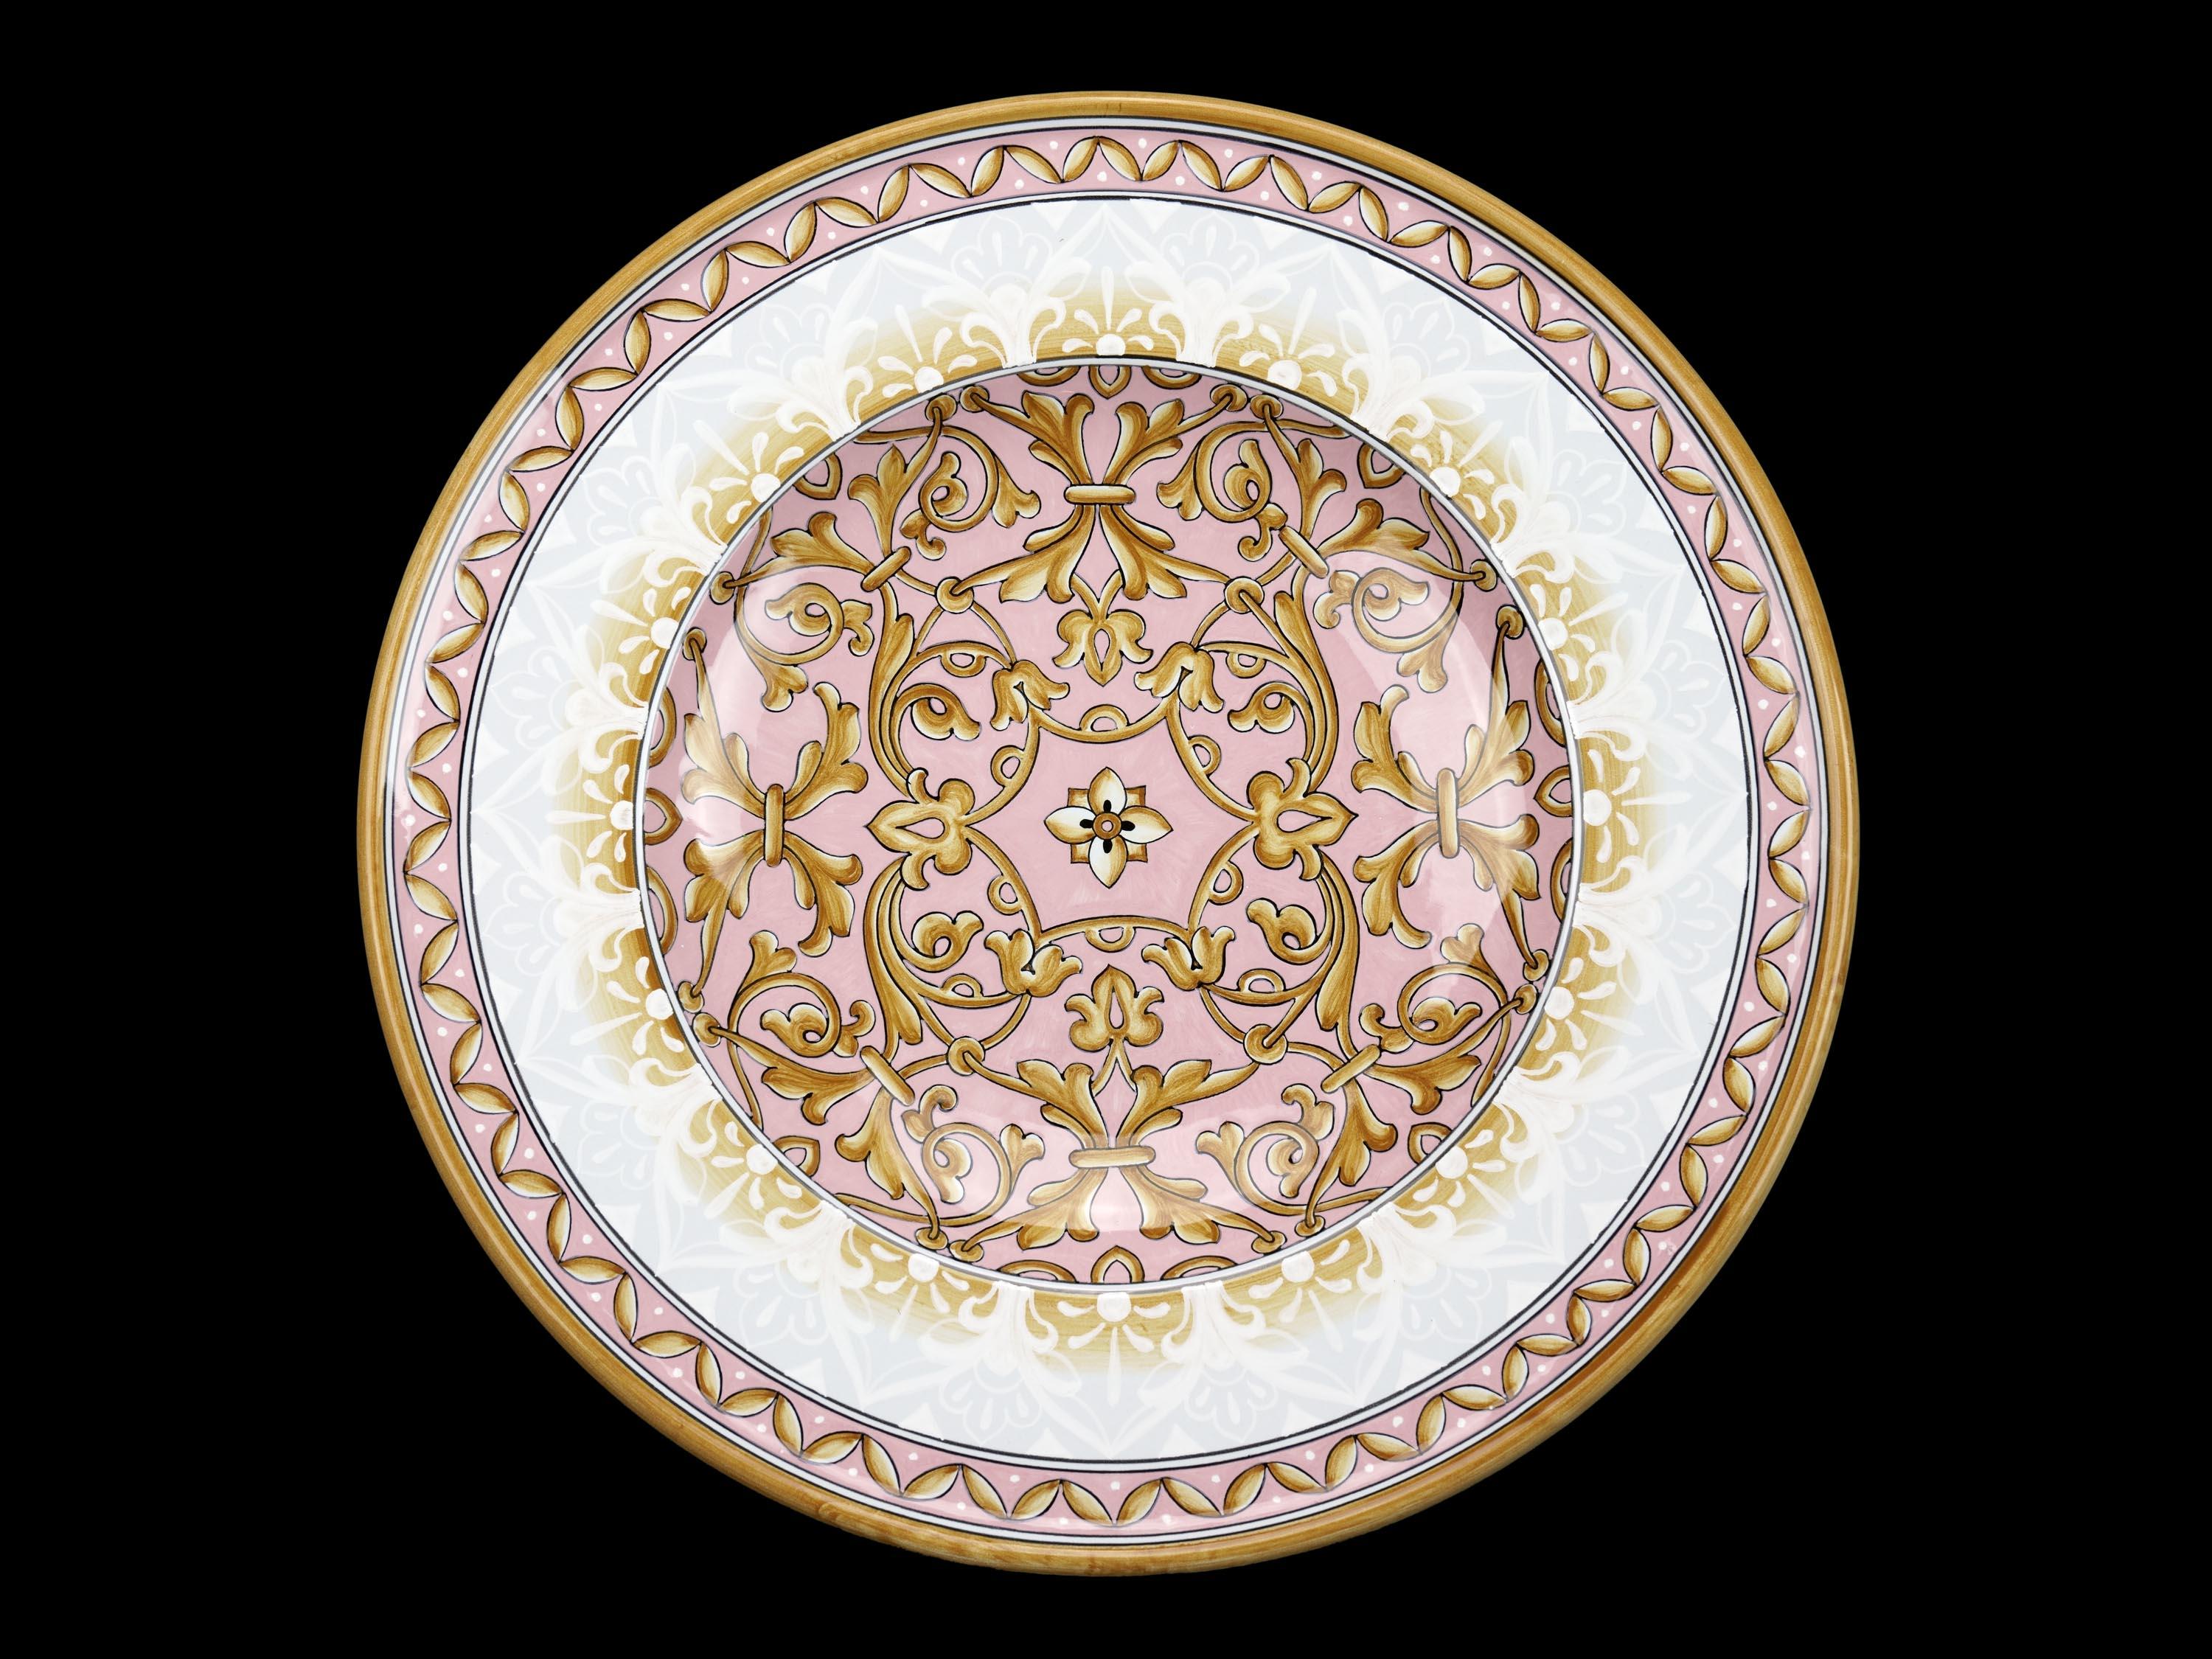 Large pink hand painted ceramic plate, made in a limited edition of 30 pieces. This majolica plate made in Italy can be used as a centerpiece, tray, fruit bowl, as a decorative wall dish or as a simple ornament for the home and for outdoors. The